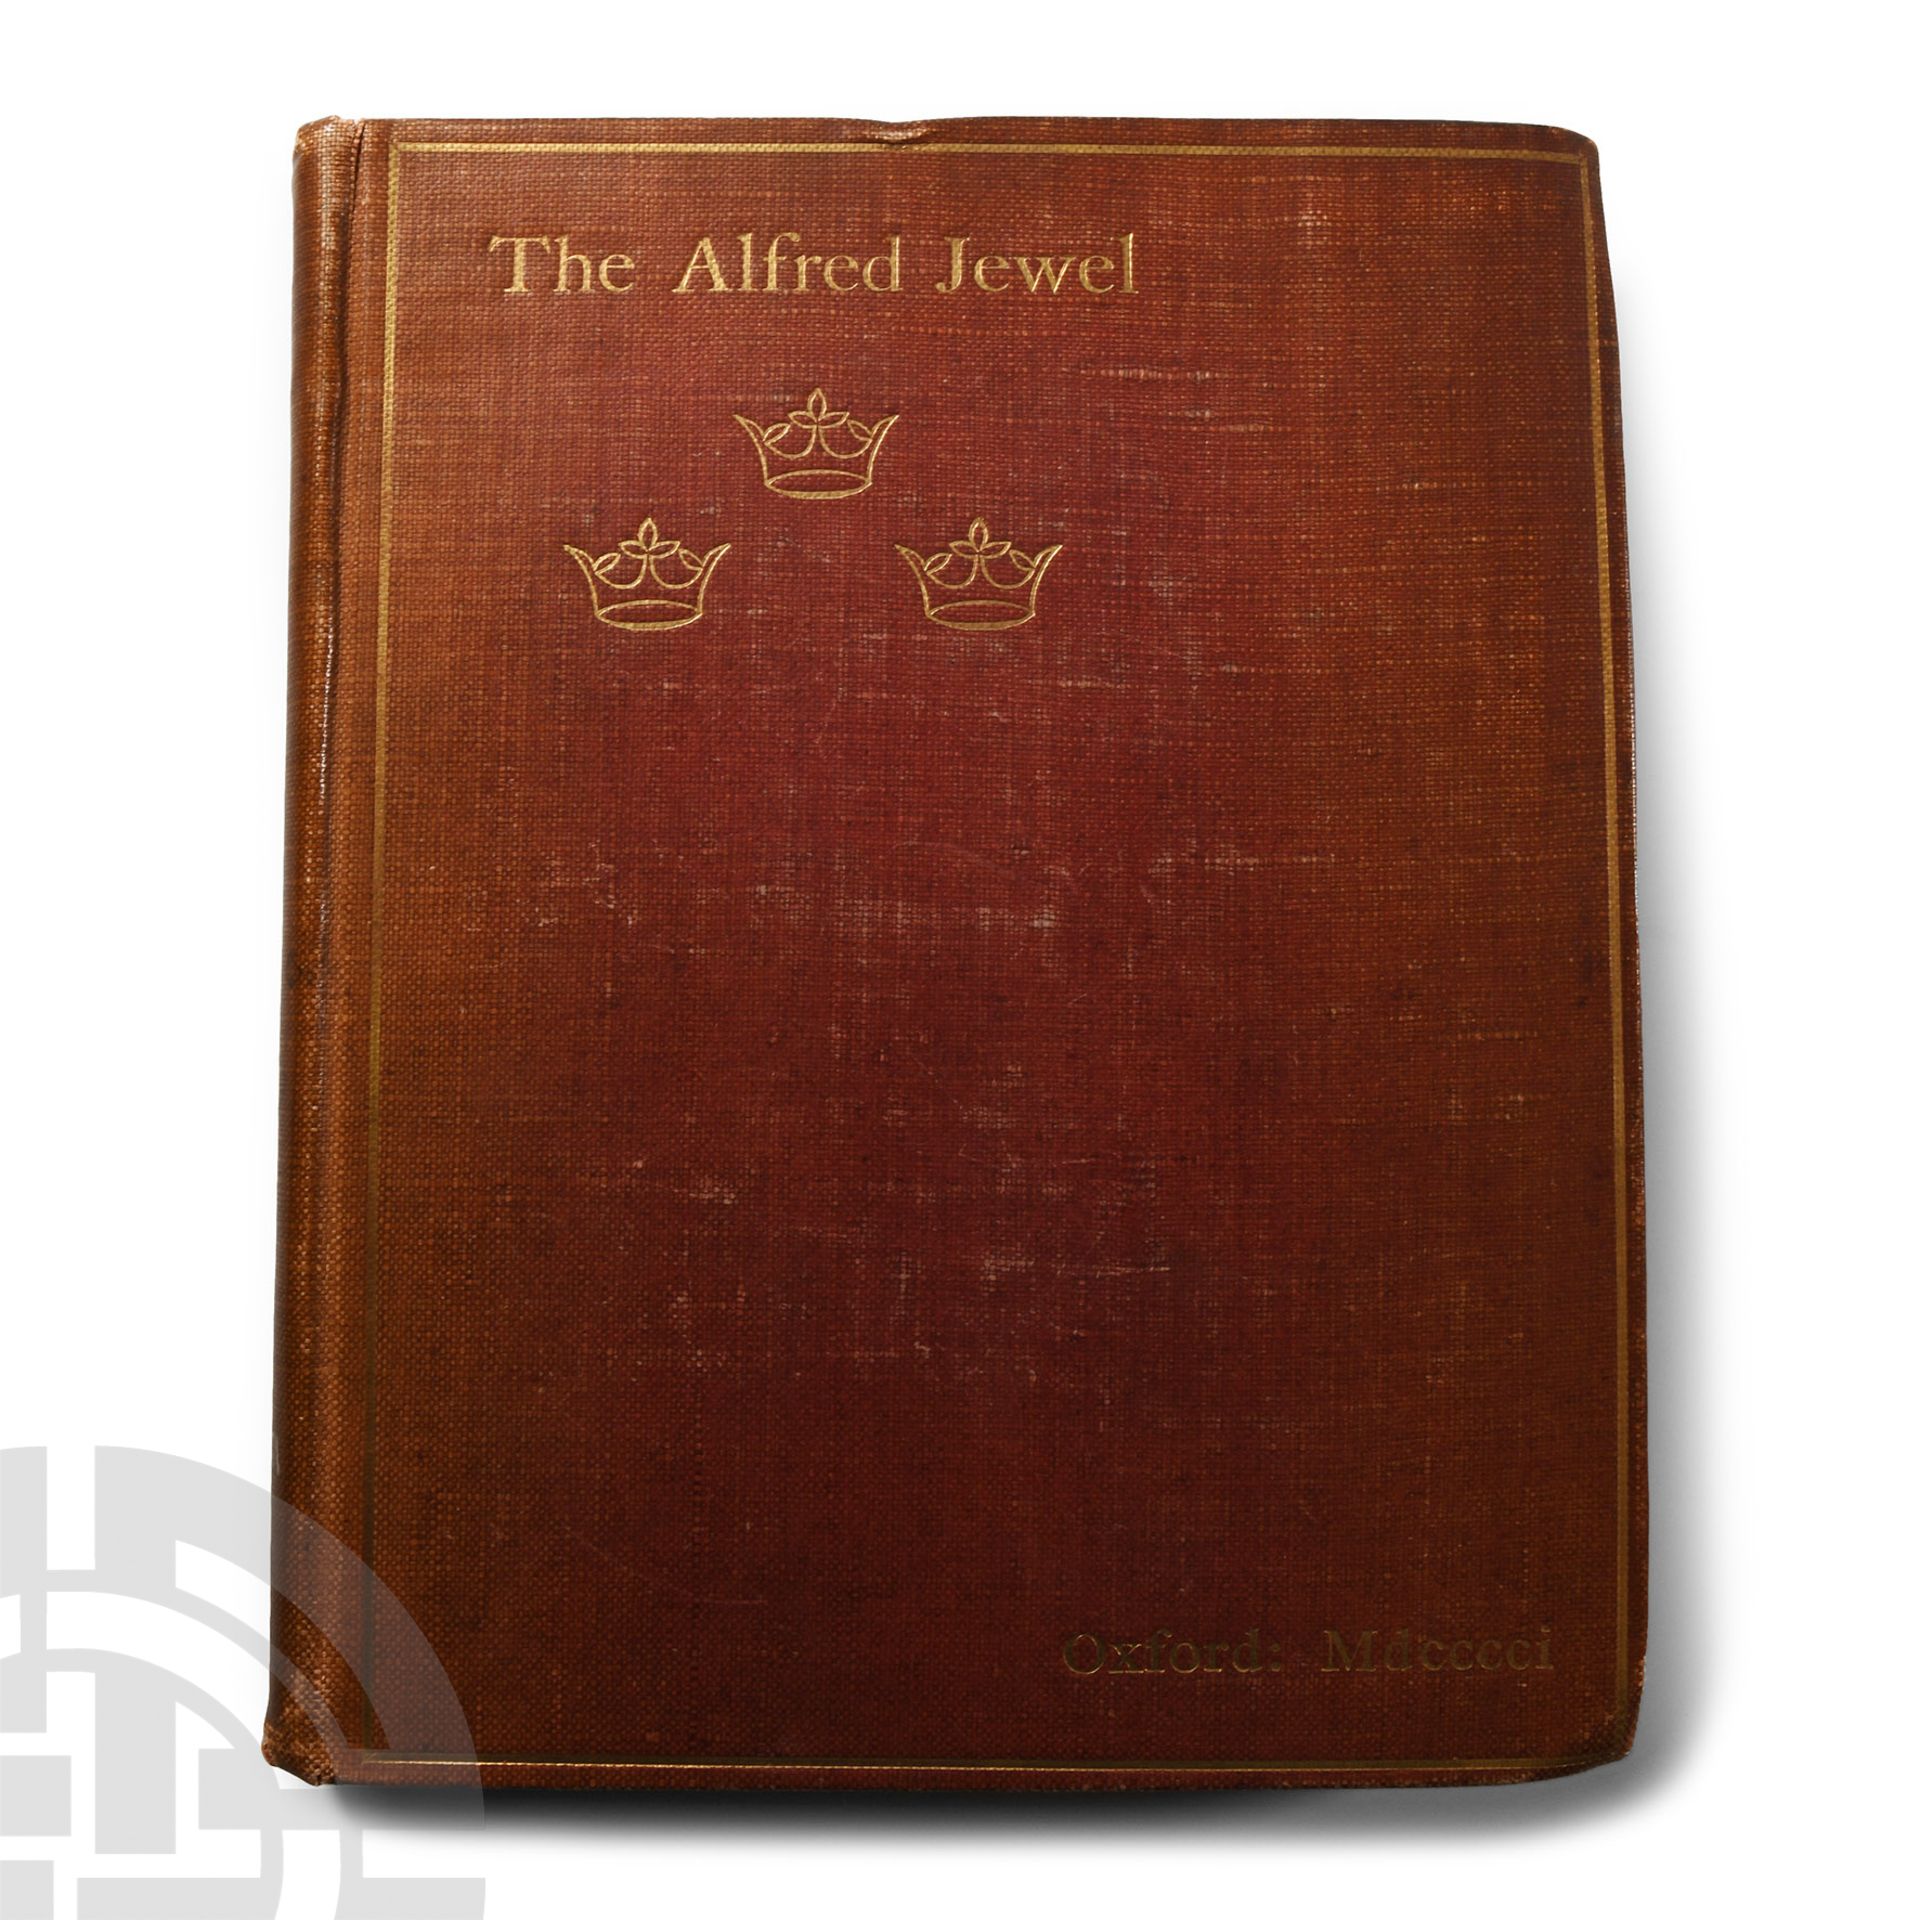 Archaeological Books - Earle - The Alfred Jewel